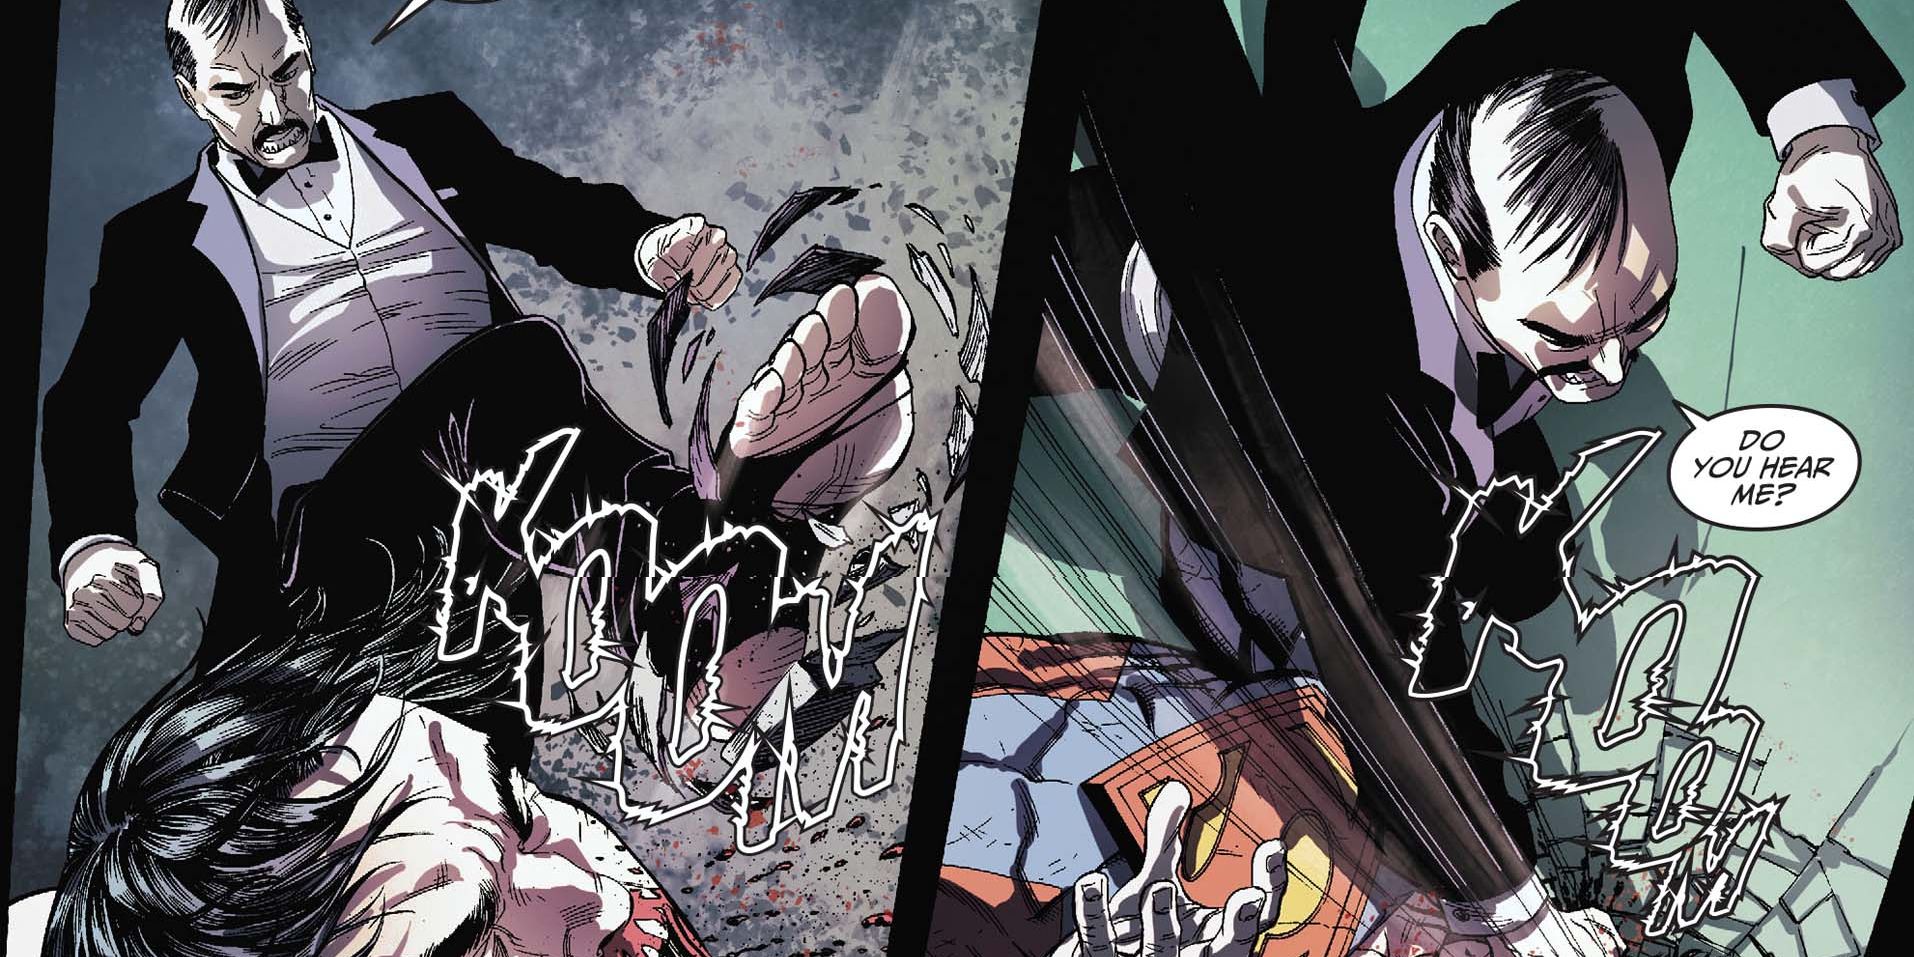 Two panels showing Alfred Pennyworth kicking and punching Suprman in Injustice